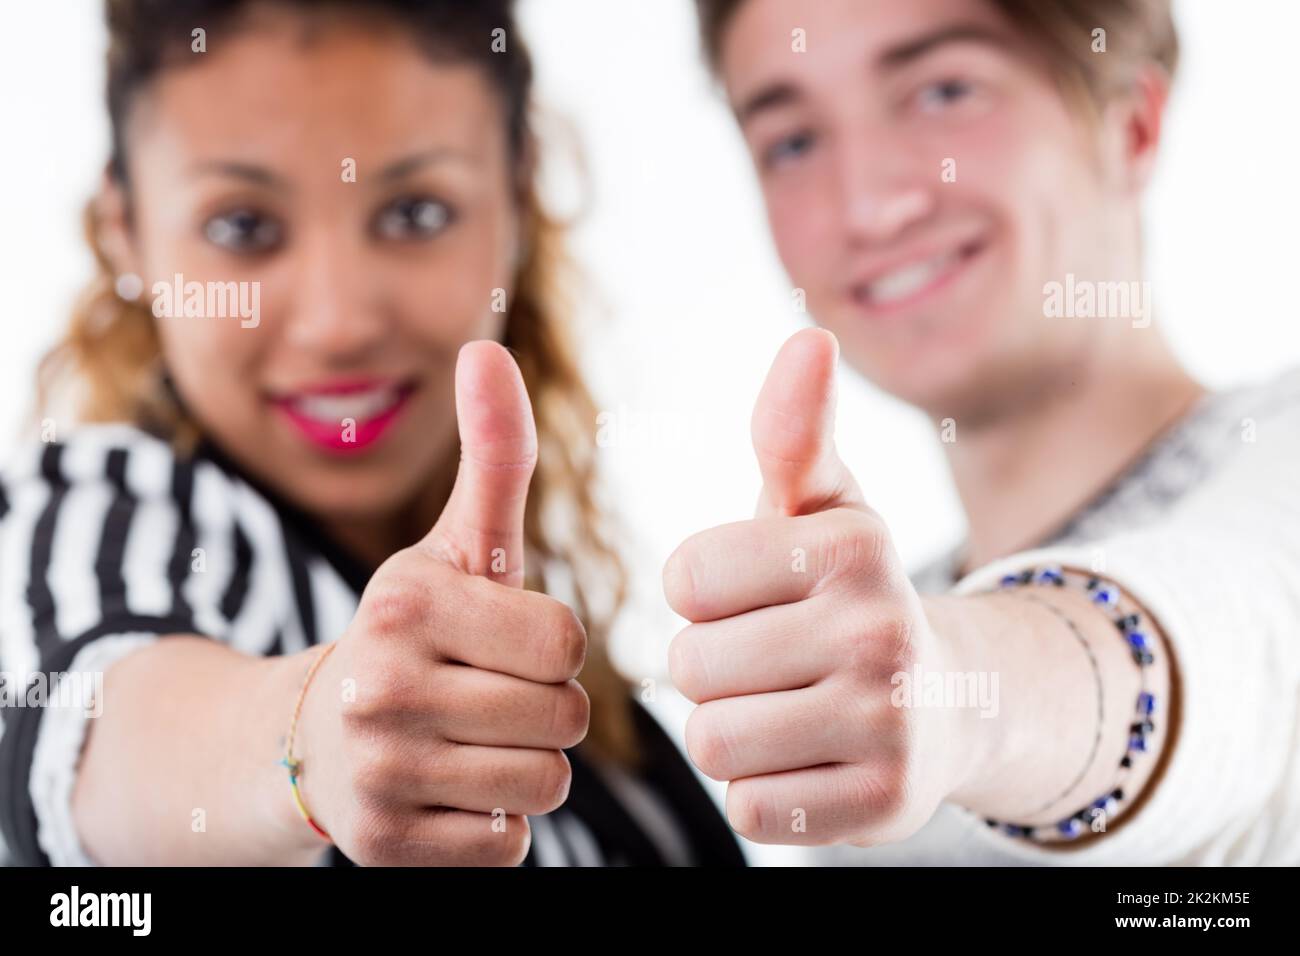 Two young people giving thumbs up in close up Stock Photo